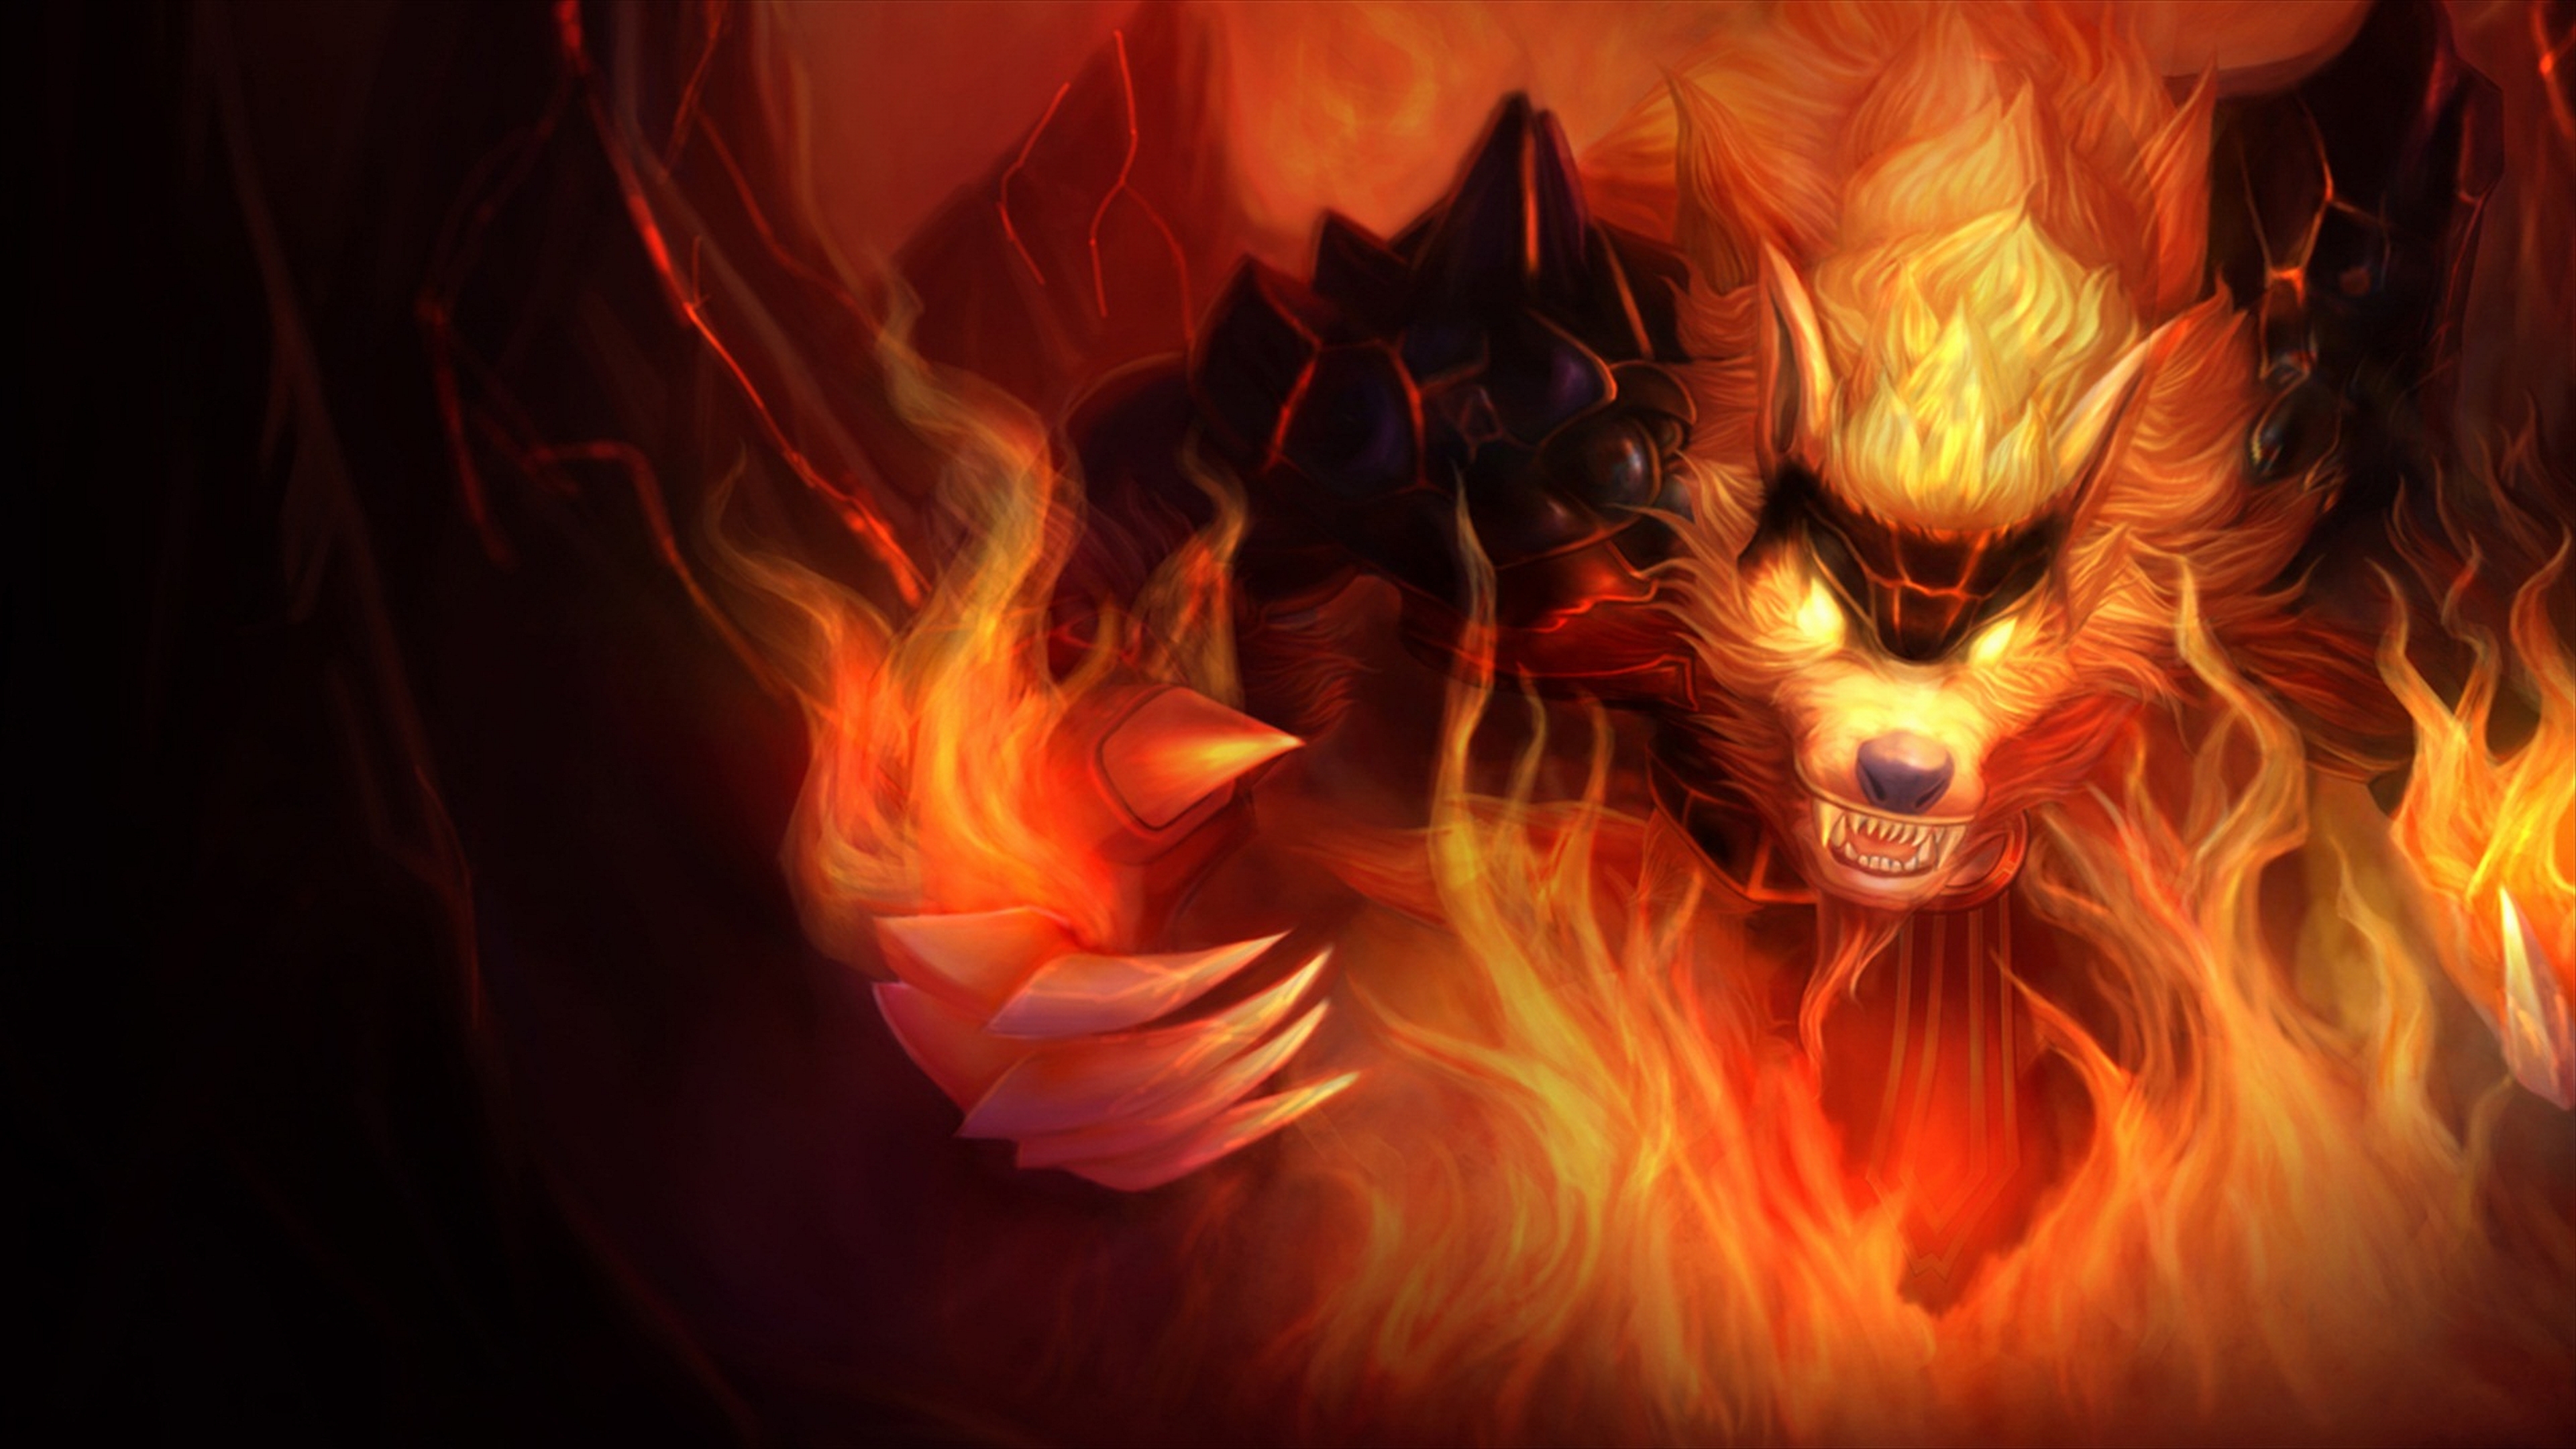 Warwick, the fearsome champion from League of Legends, dominating in a thrilling video game.